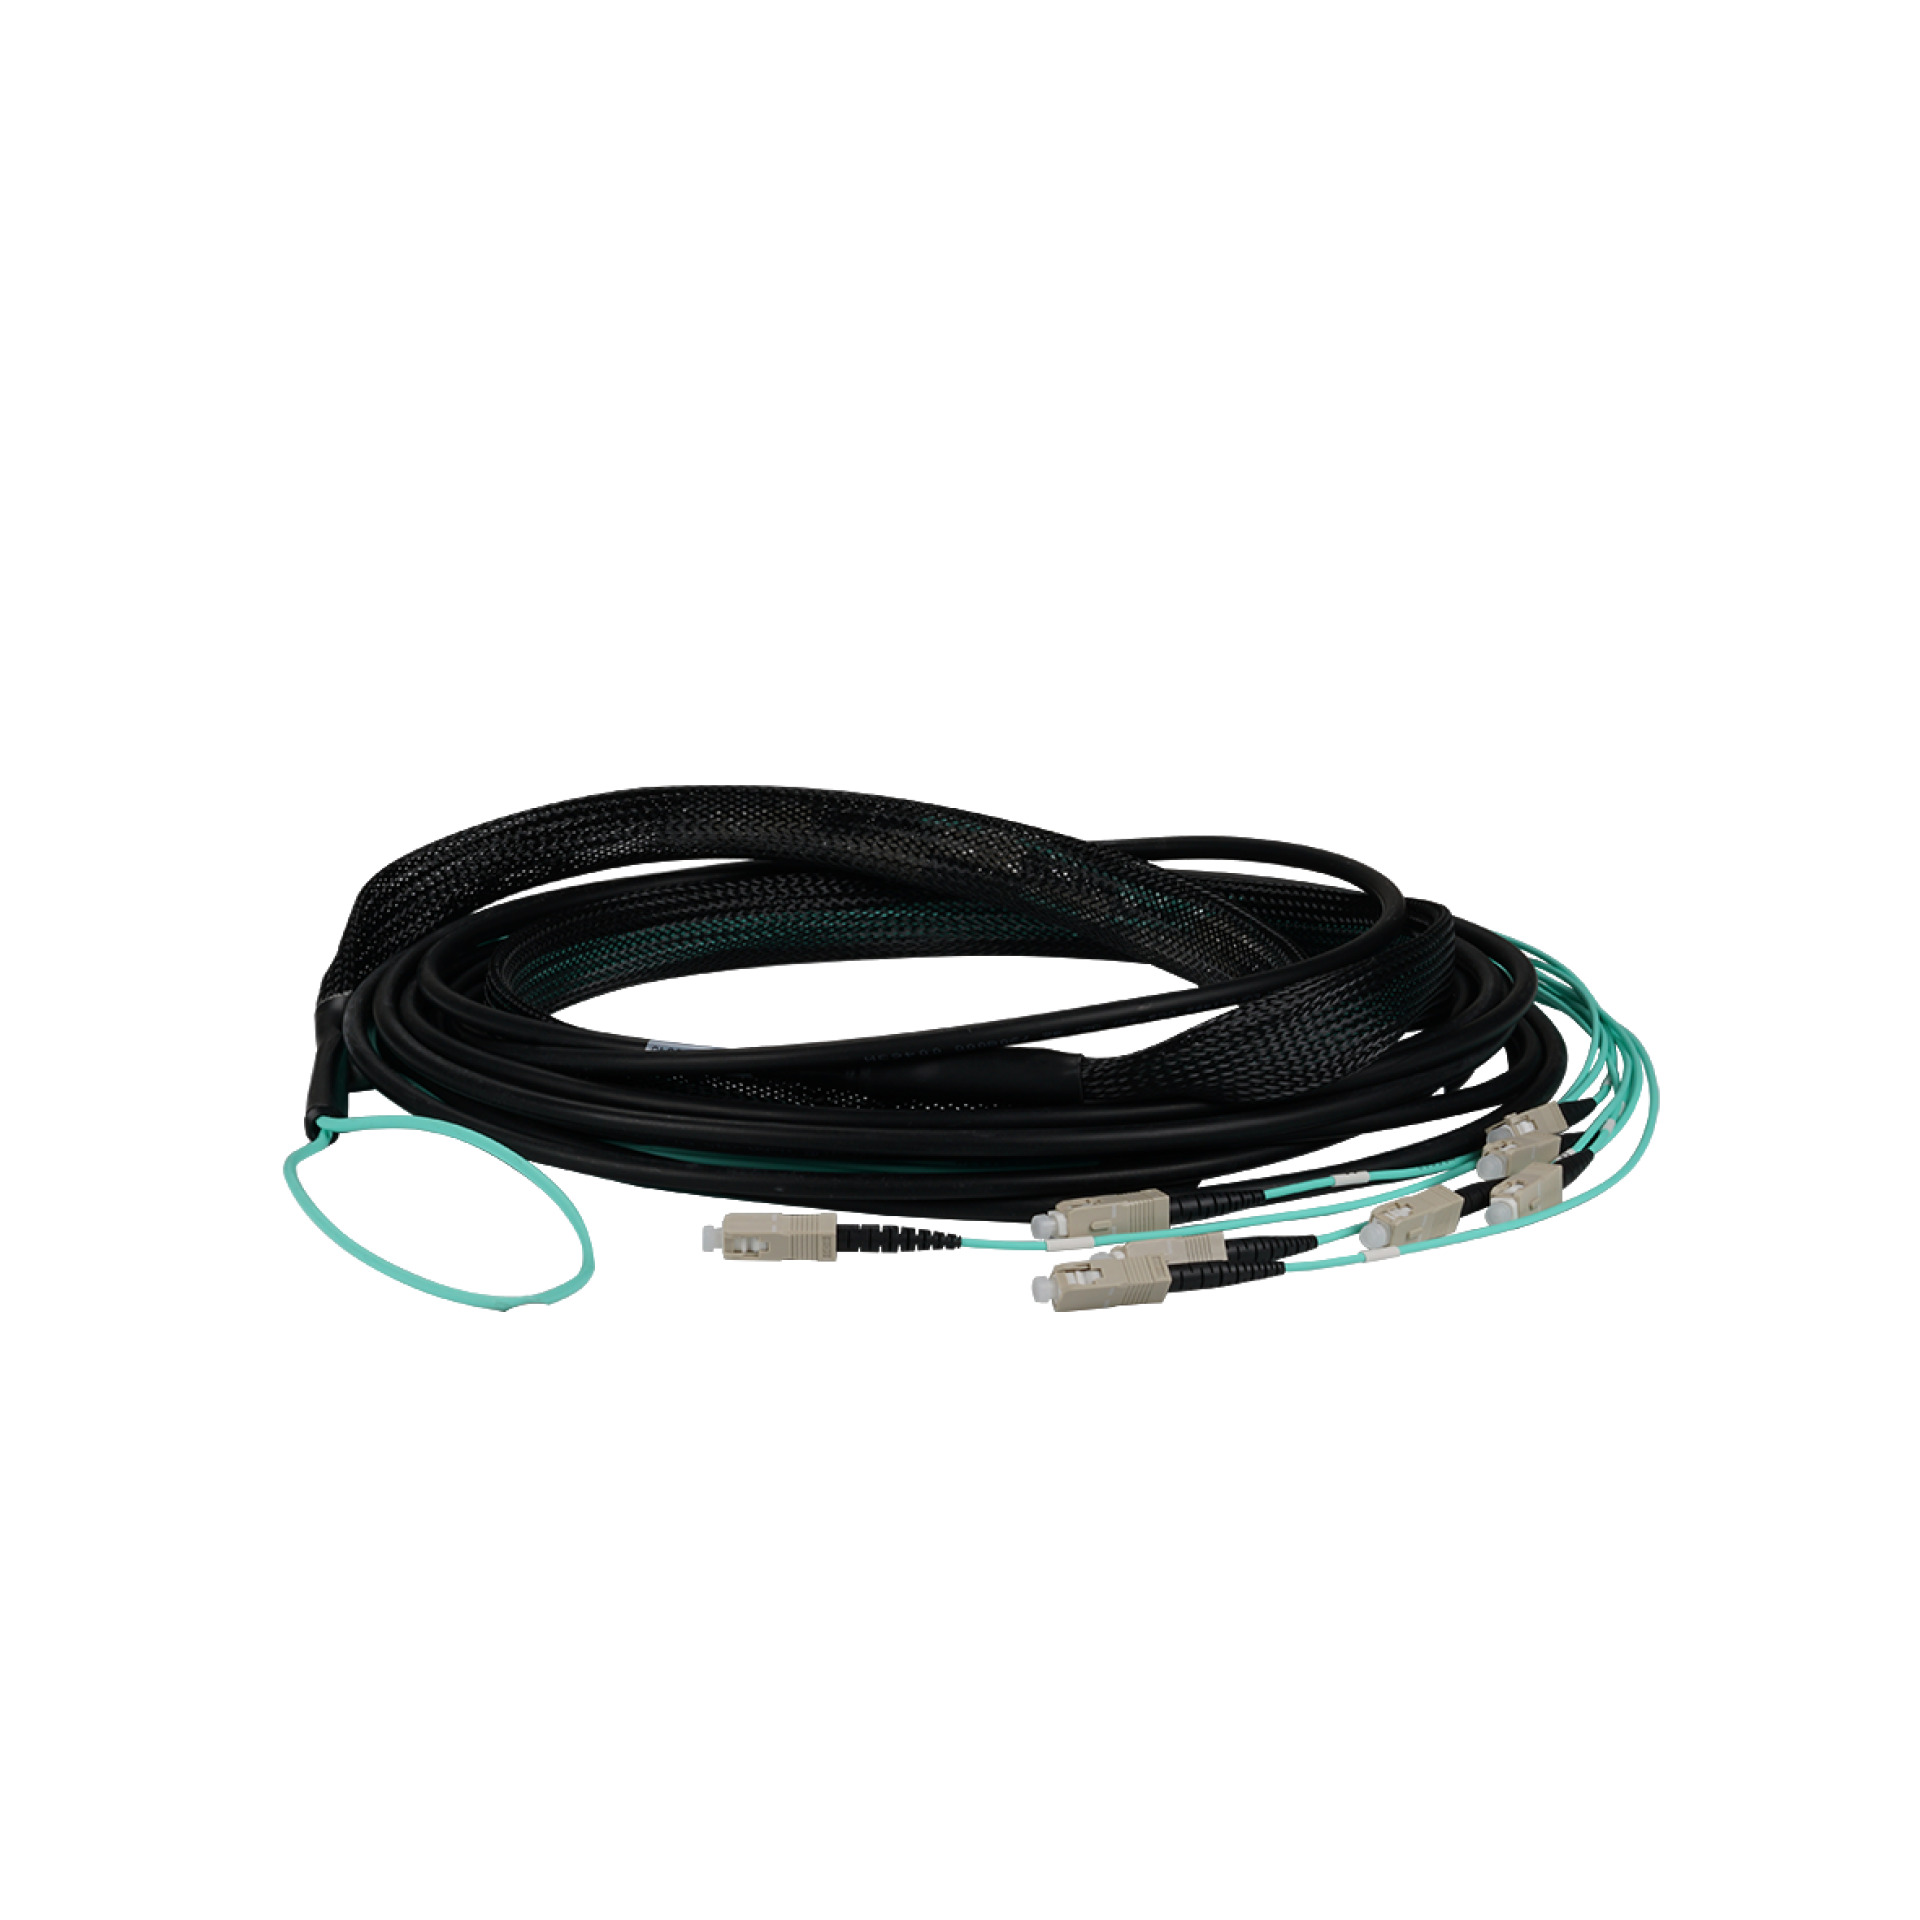 Trunk cable U-DQ(ZN)BH 8G 50/125, SC/SC OM3 170m